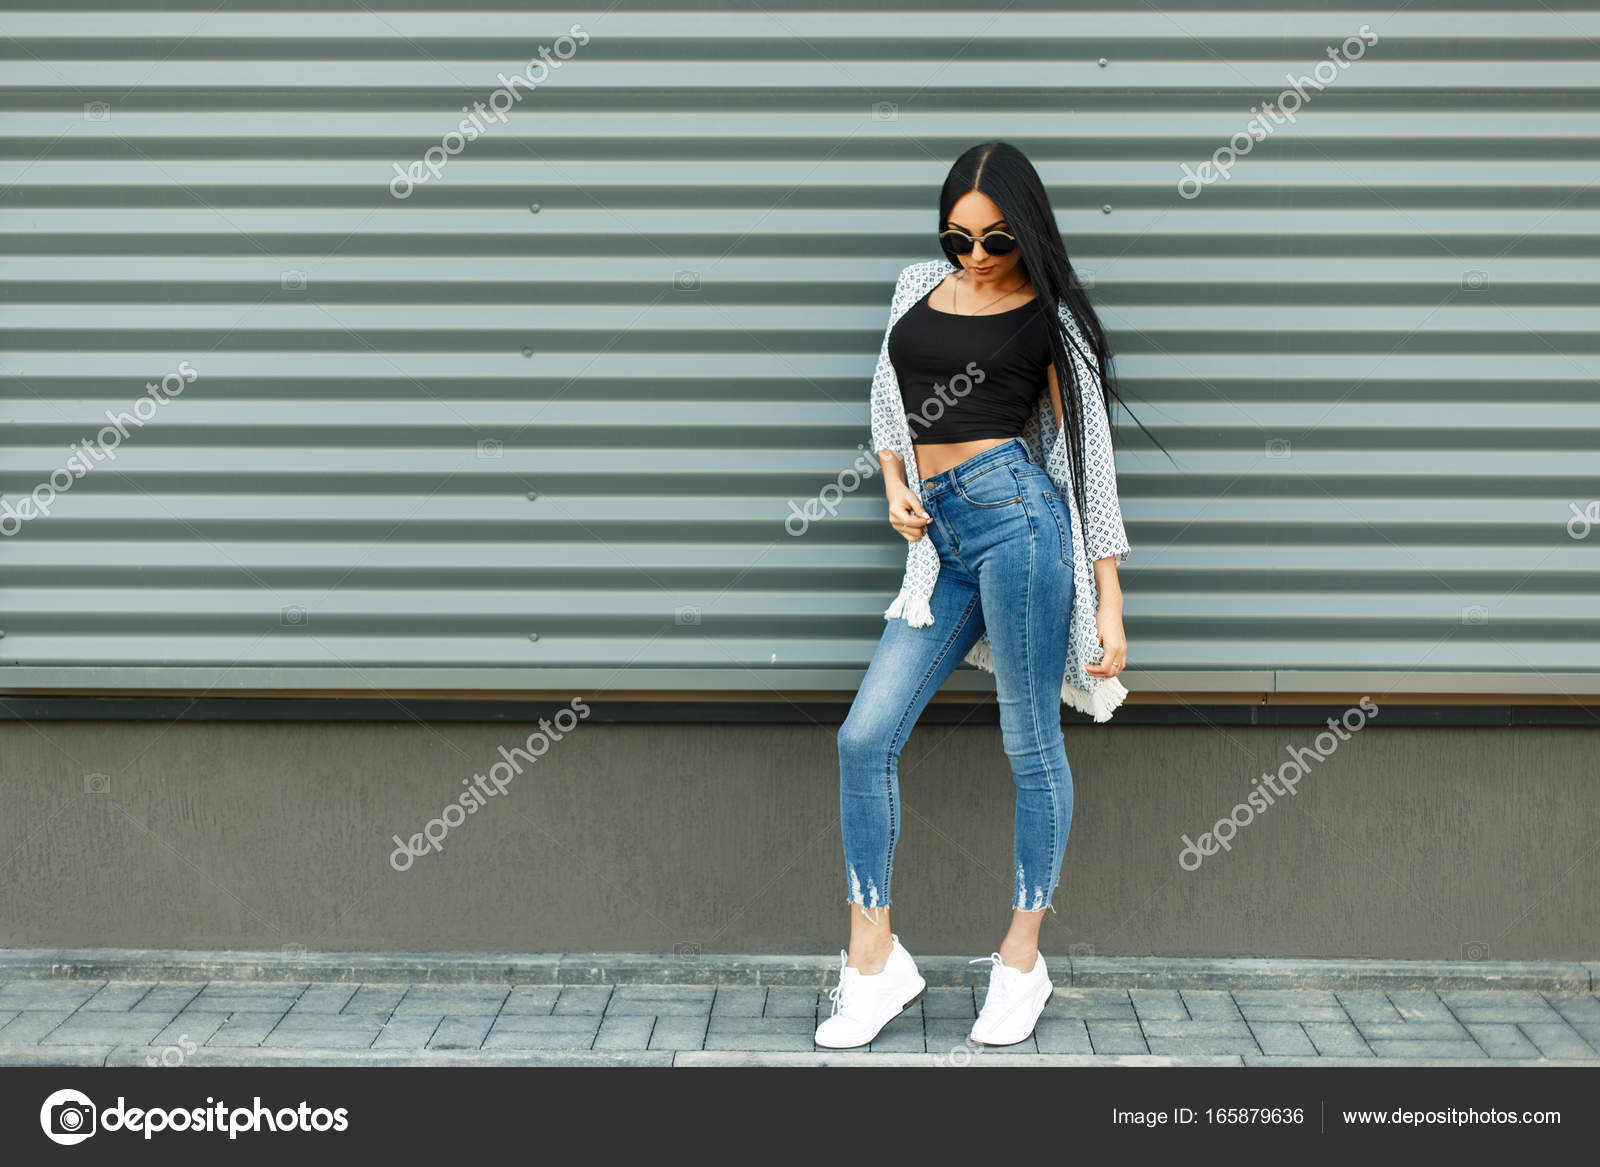 Beautiful Stylish Woman In A Fashionable White Cloak With A Black T Shirt And Blue Jeans With A High Waist With White Shoes Near The Metal Wall In The Street Stock Photo By C